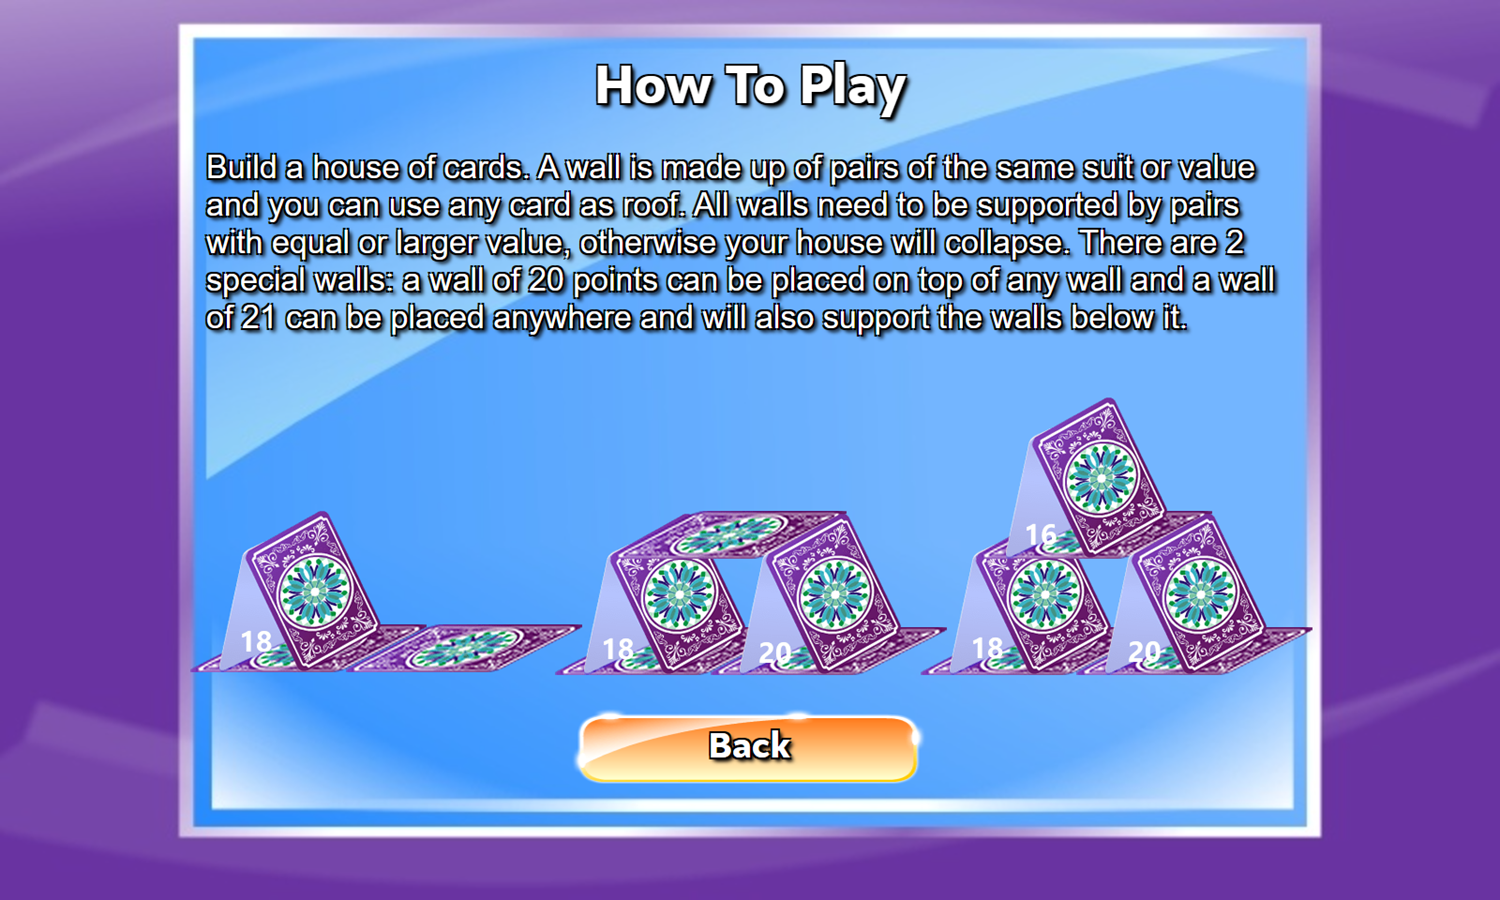 House of Cards Game How To Play Screenshot.